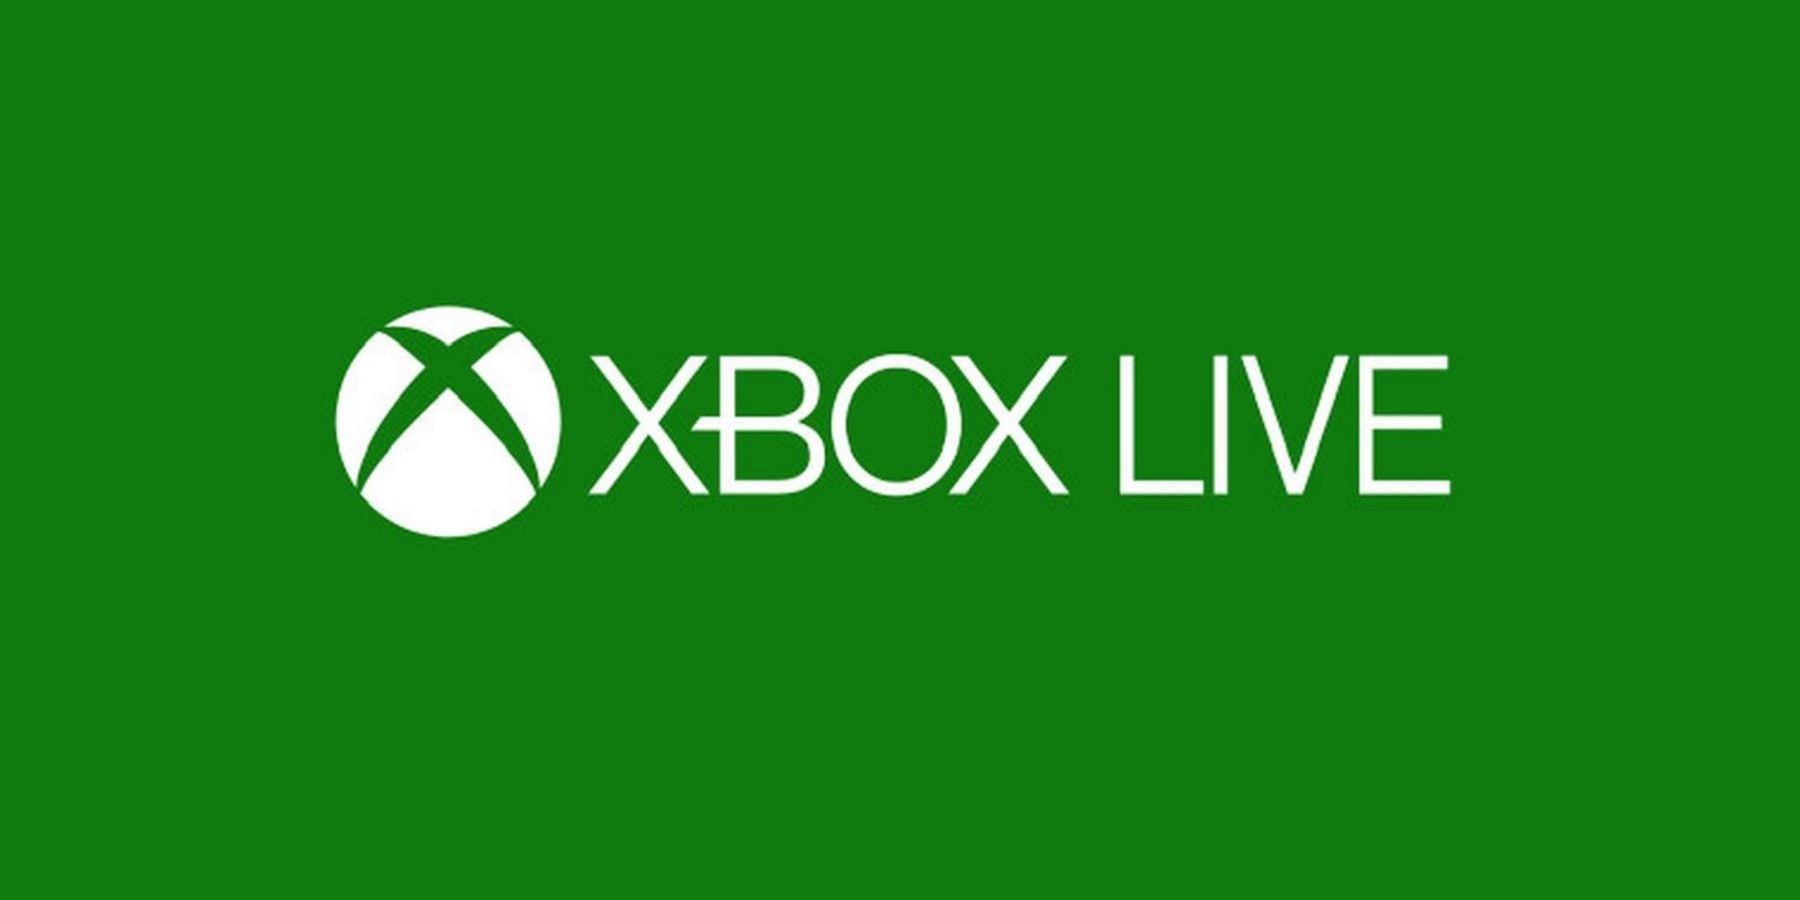 Xbox Live is weer down